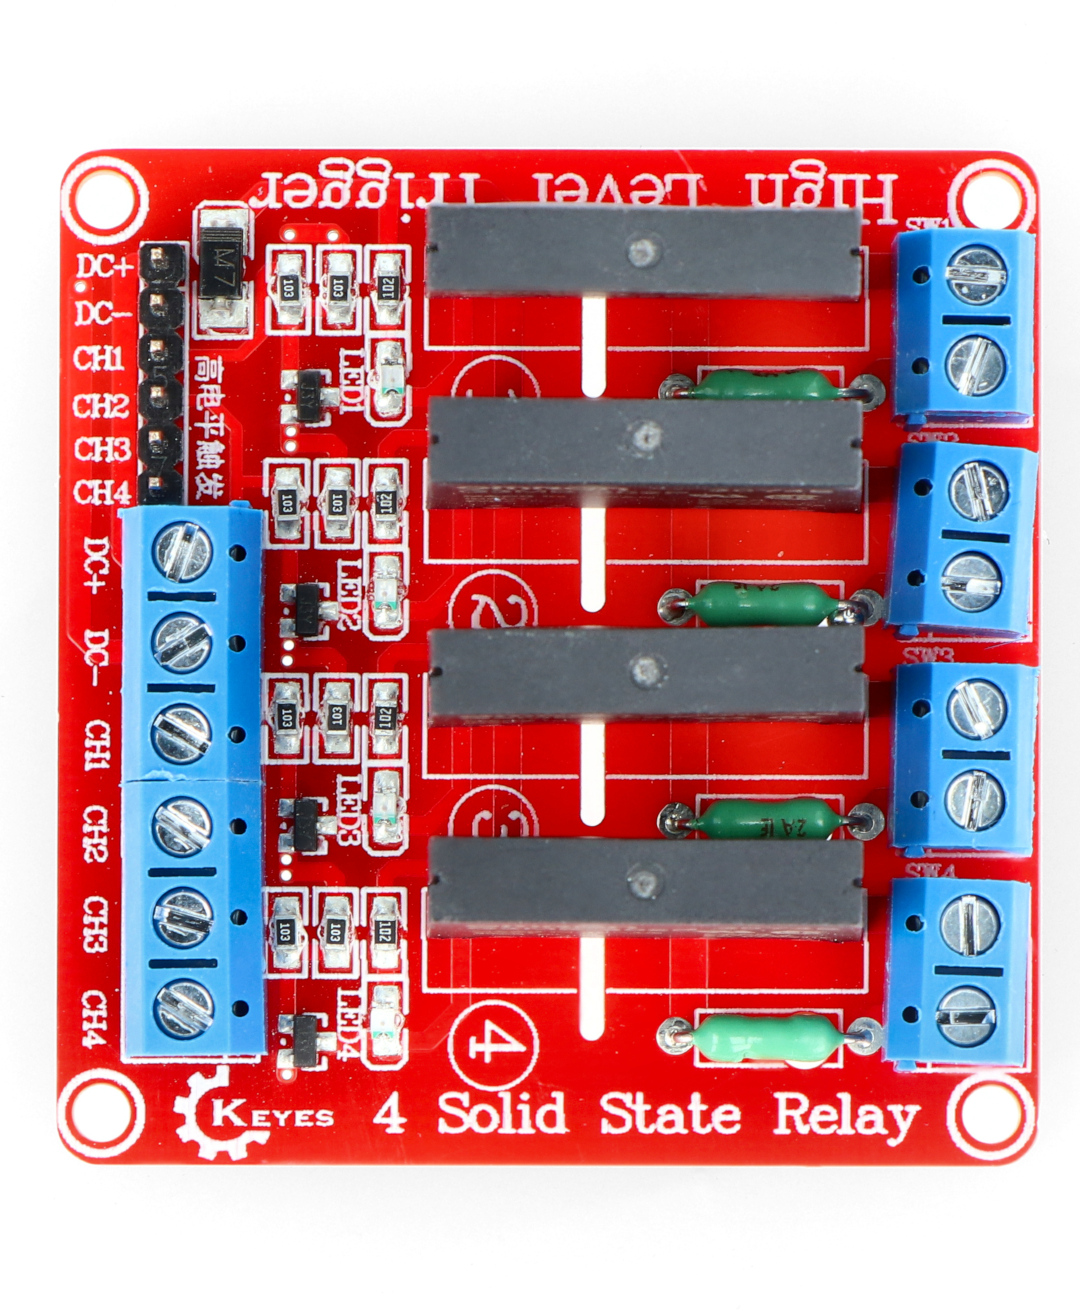 relay - How to command a 220v device through a 12v output - Electrical  Engineering Stack Exchange